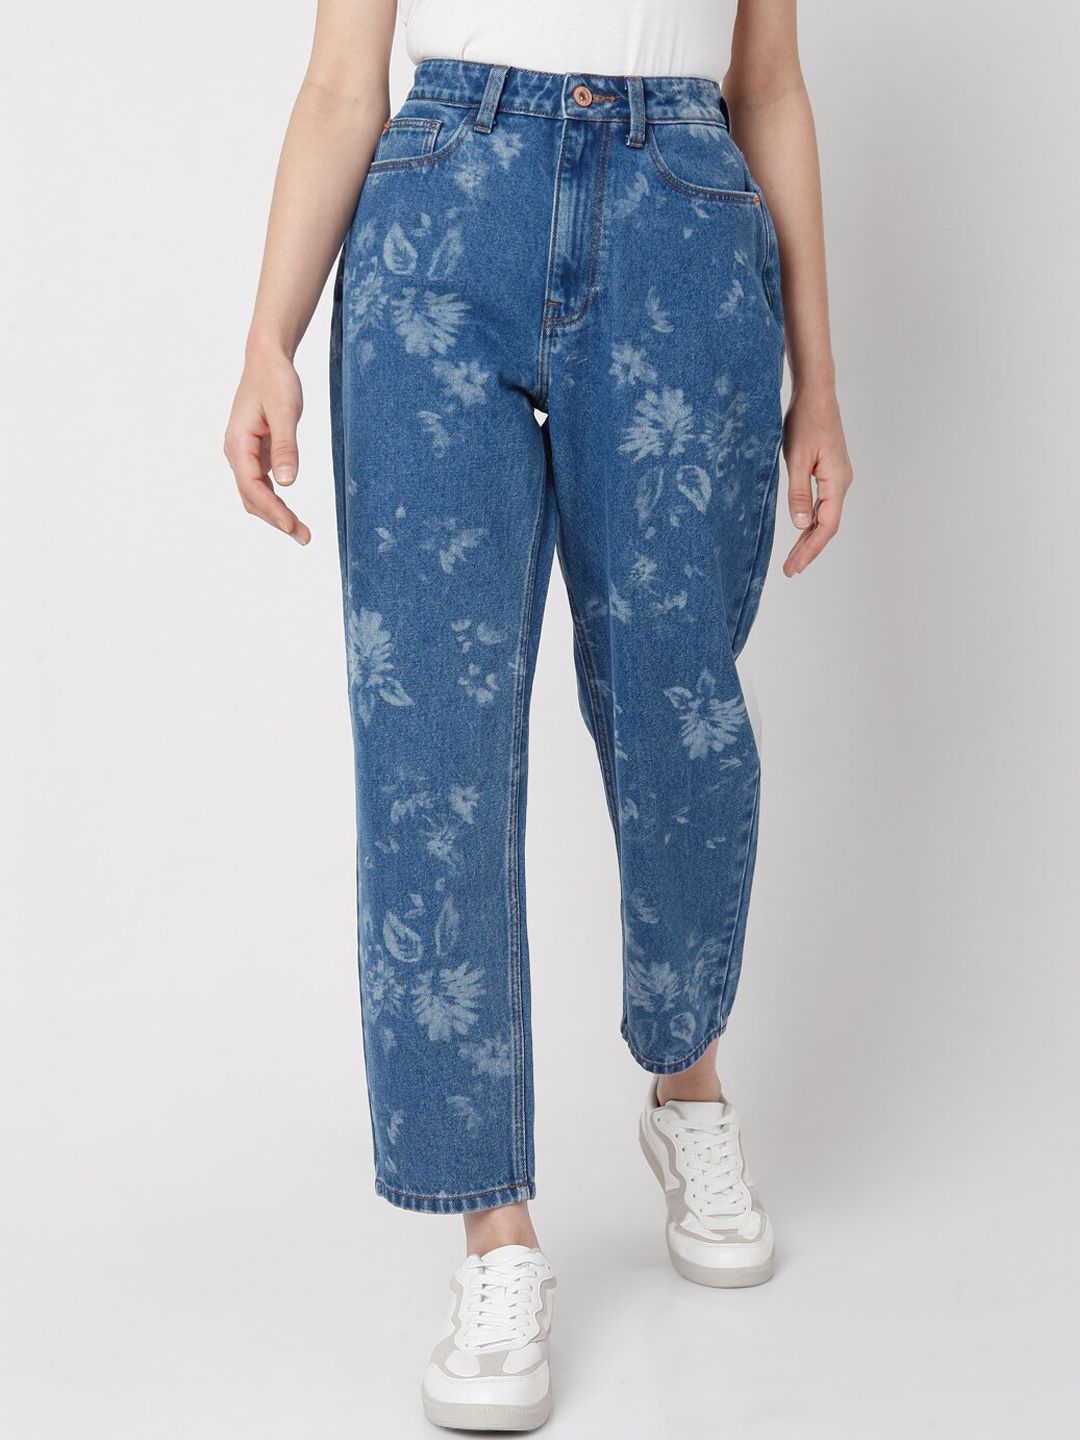 Vero Moda Women Blue High-Rise Highly Distressed Jeans Price in India